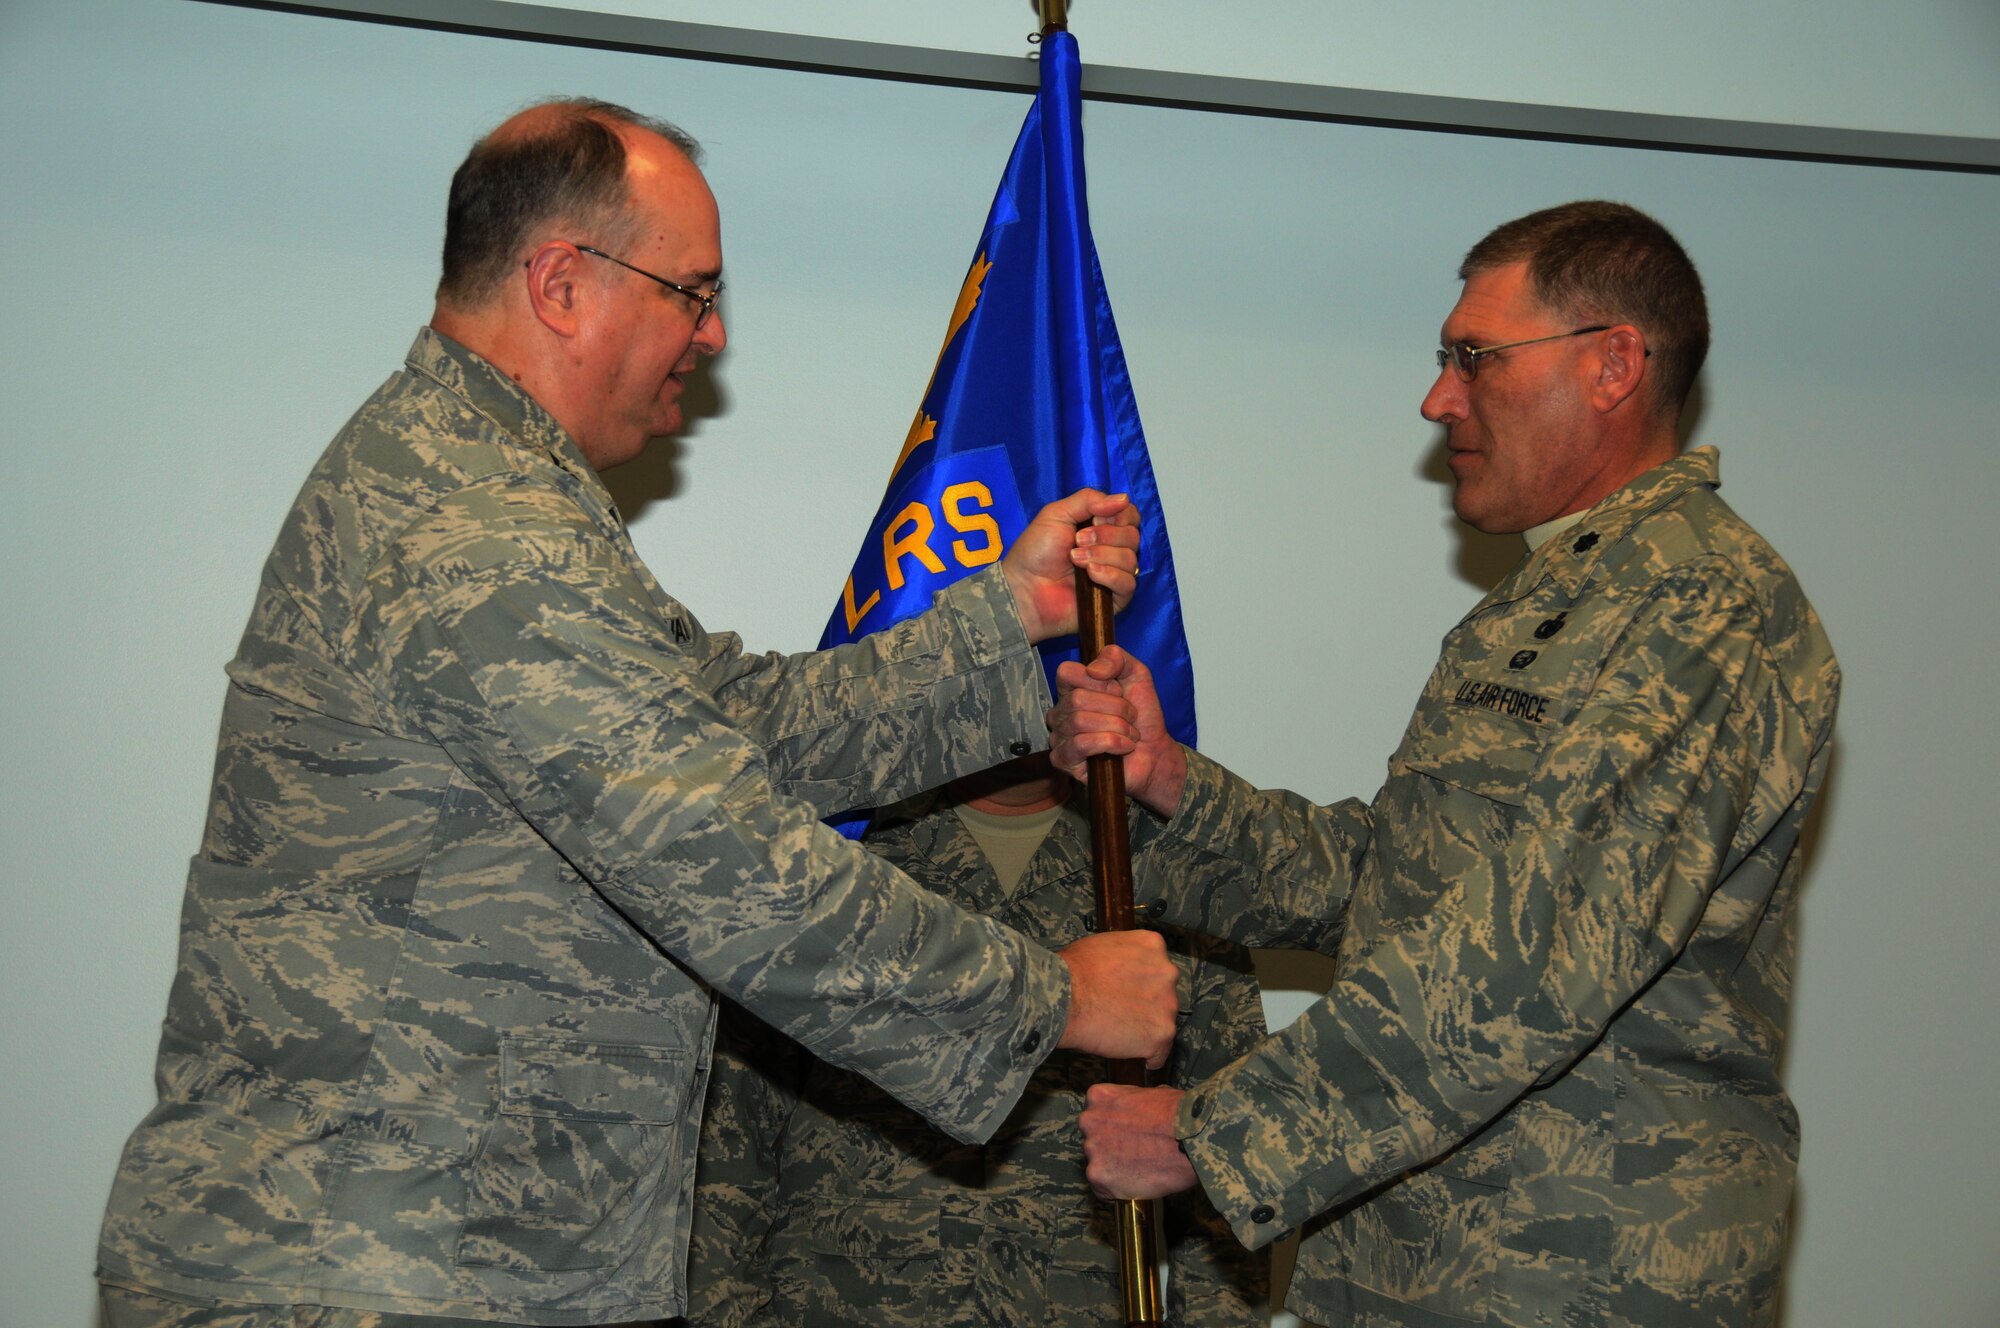 Lt. Col. Kenneth Anderson (on right) took command of the 107th Airlift Wing's Logistics Readiness squadron in a ceremony held here on Feb. 13. The colonel previously held the position as LRS operations officer and replaces outgoing LRS Commander Lt. Col. Steven Hefferon, who now holds the position of 107th Comptroller Flight Commander. Passing the LRS guidon is 107th Mission Support Group Commander Col. Timothy Vaughan. (U.S. Air Force photo/Tech. Sgt. Justin Huett)